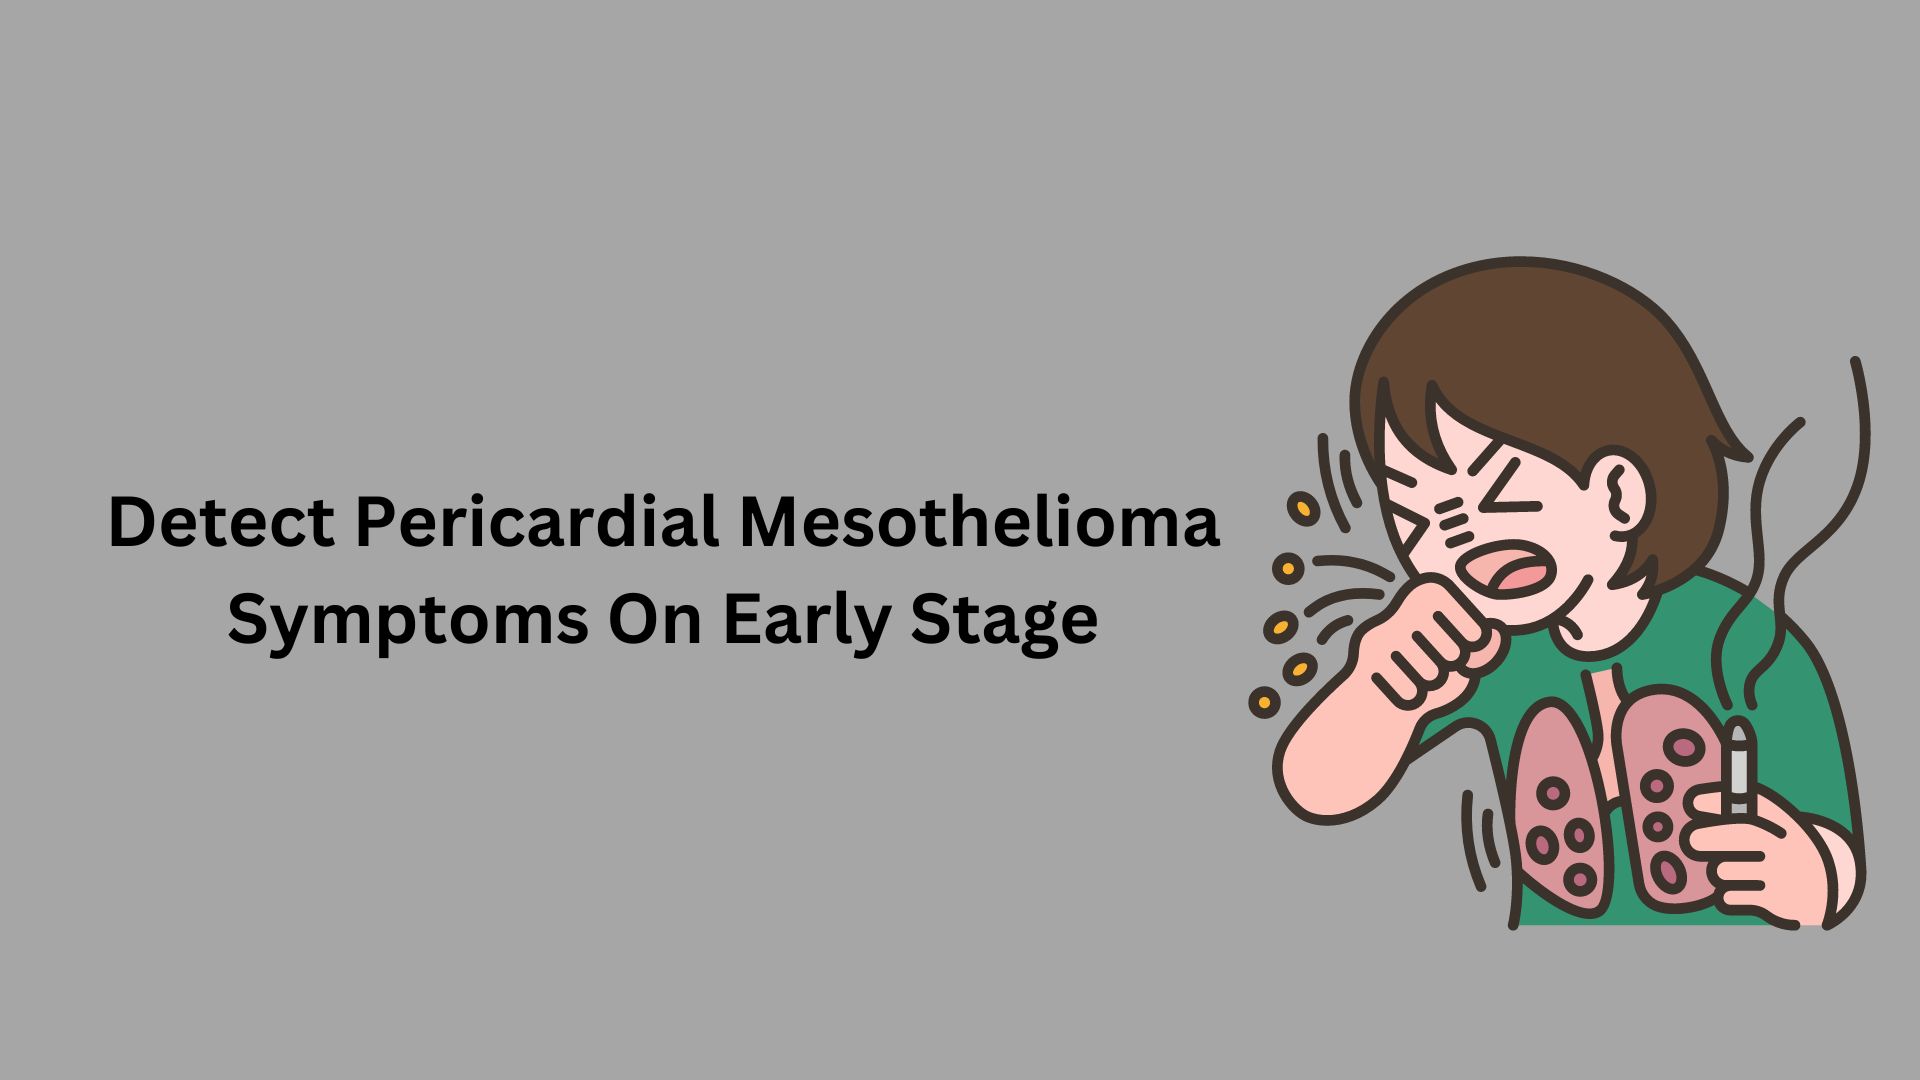 Detect Pericardial Mesothelioma Symptoms On Early Stage